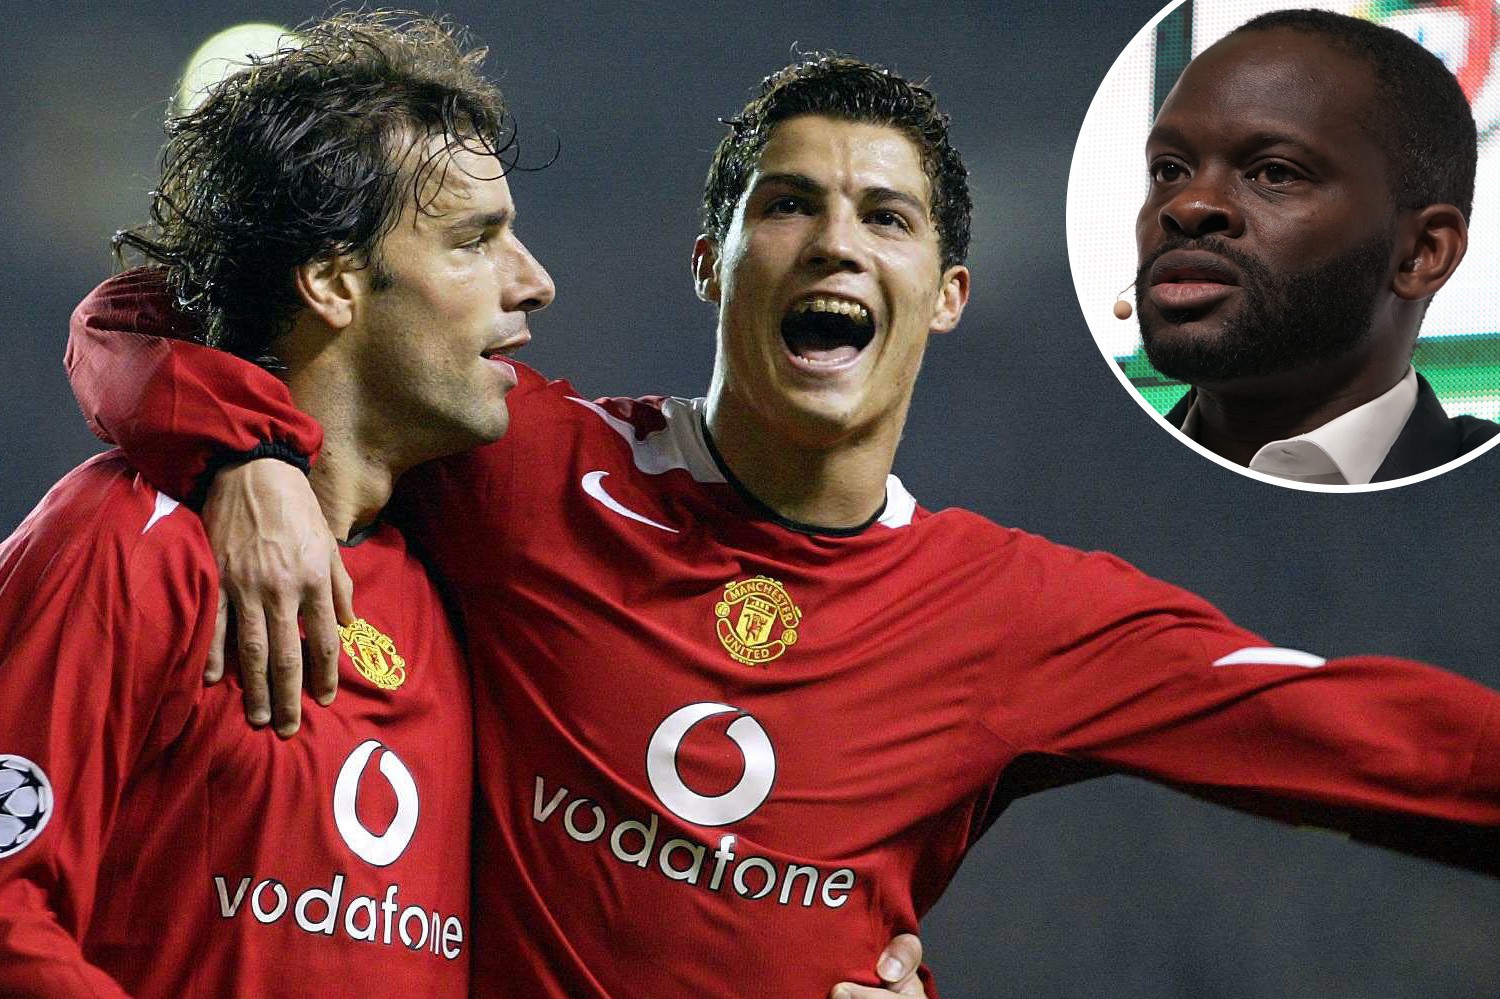 , Van Nistelrooy made Cristiano Ronaldo cry at Man Utd over ill-timed argument after the death of his father, claims Saha